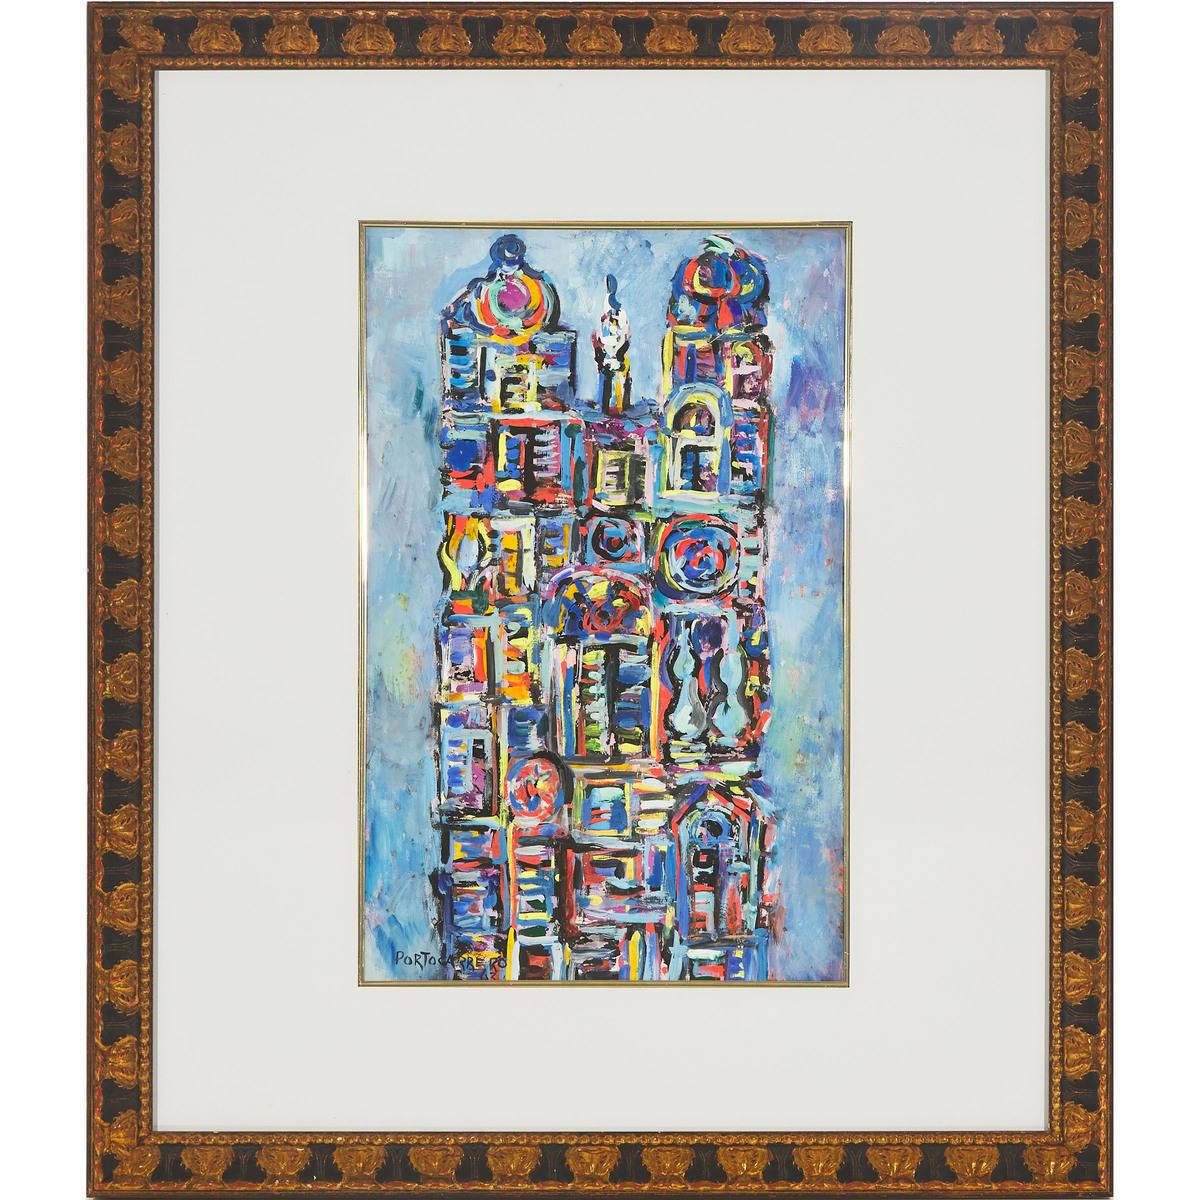 René Portocarrero (1912-1985), CATHEDRAL, 1963, signed and dated "63" lower left, sight 22.8 x 14.6 - Image 2 of 4